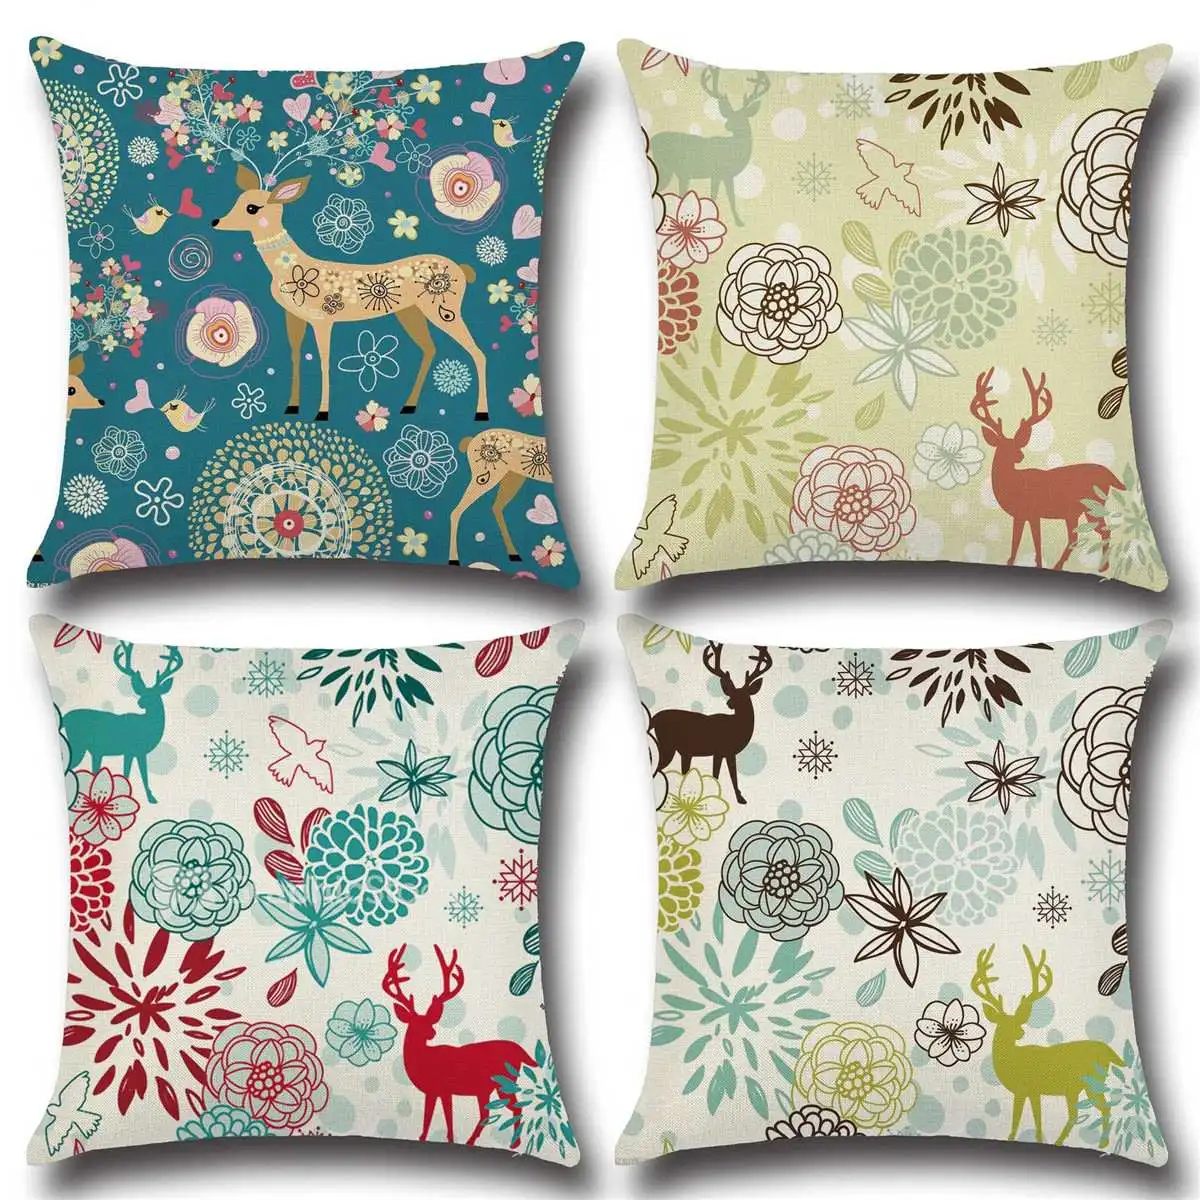 

Merry Christmas Pillow Case Elk Deer In Snow Forest Picture Cushion Cover For Home New Year Sofa Decor Short Plush Pillowcases